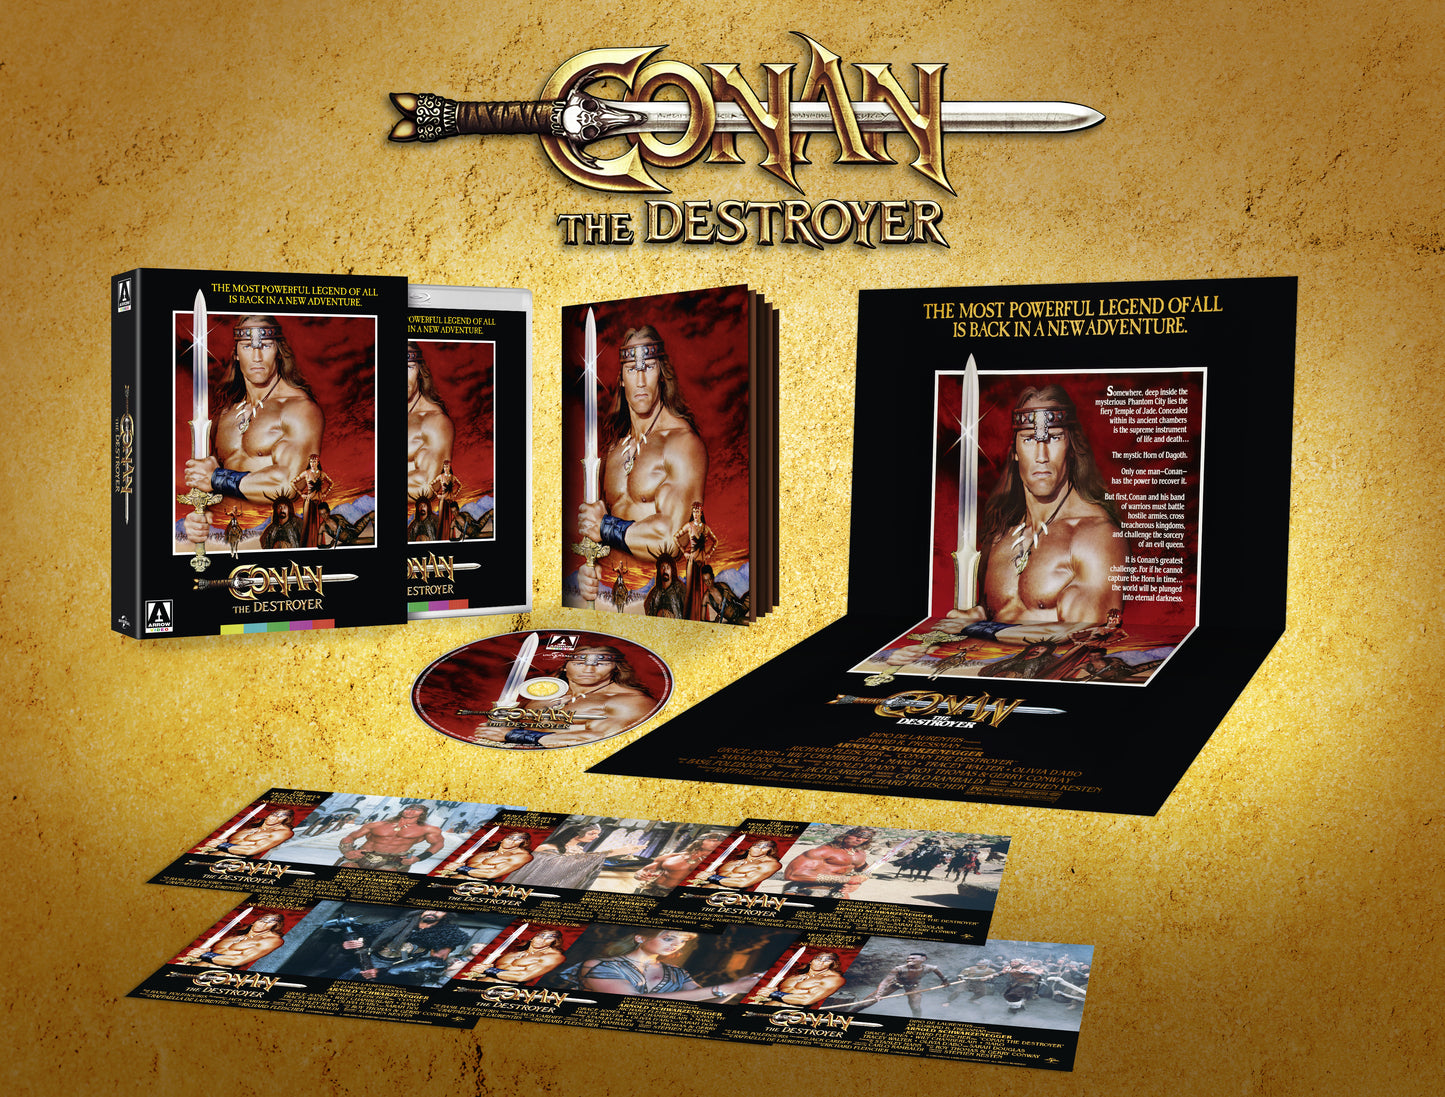 Conan The Destroyer Limited Edition Arrow Video Blu-Ray [NEW] [SLIPCOVER]